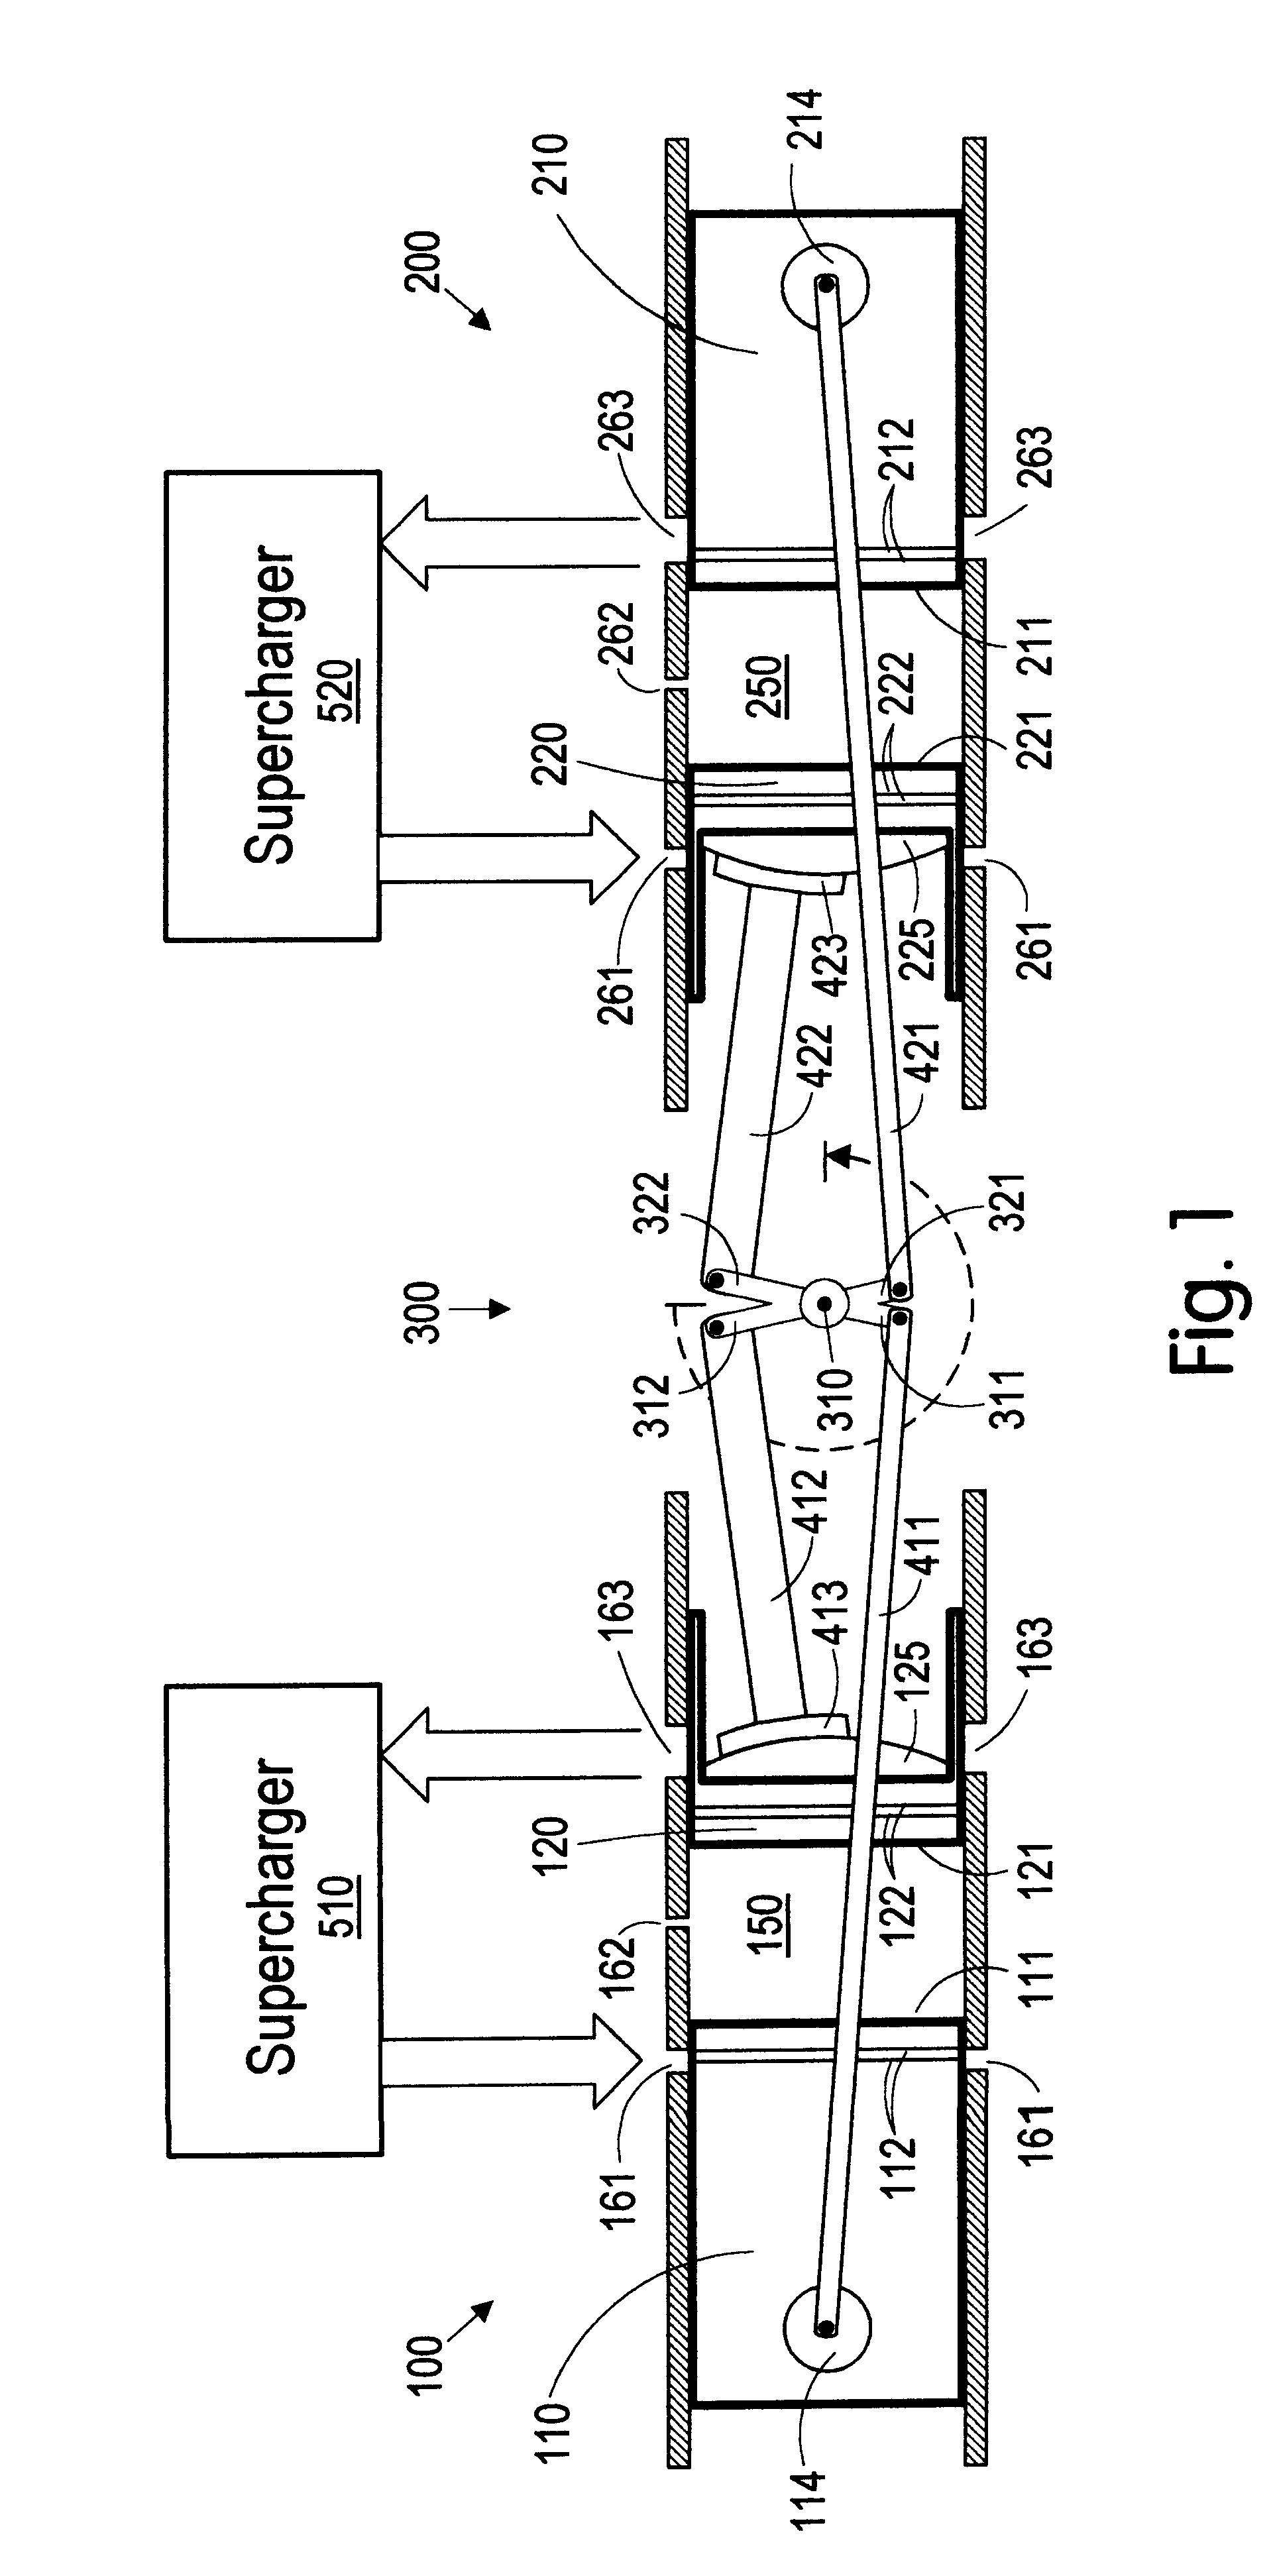 Internal combustion engine with a single crankshaft and having opposed cylinders with opposed pistons